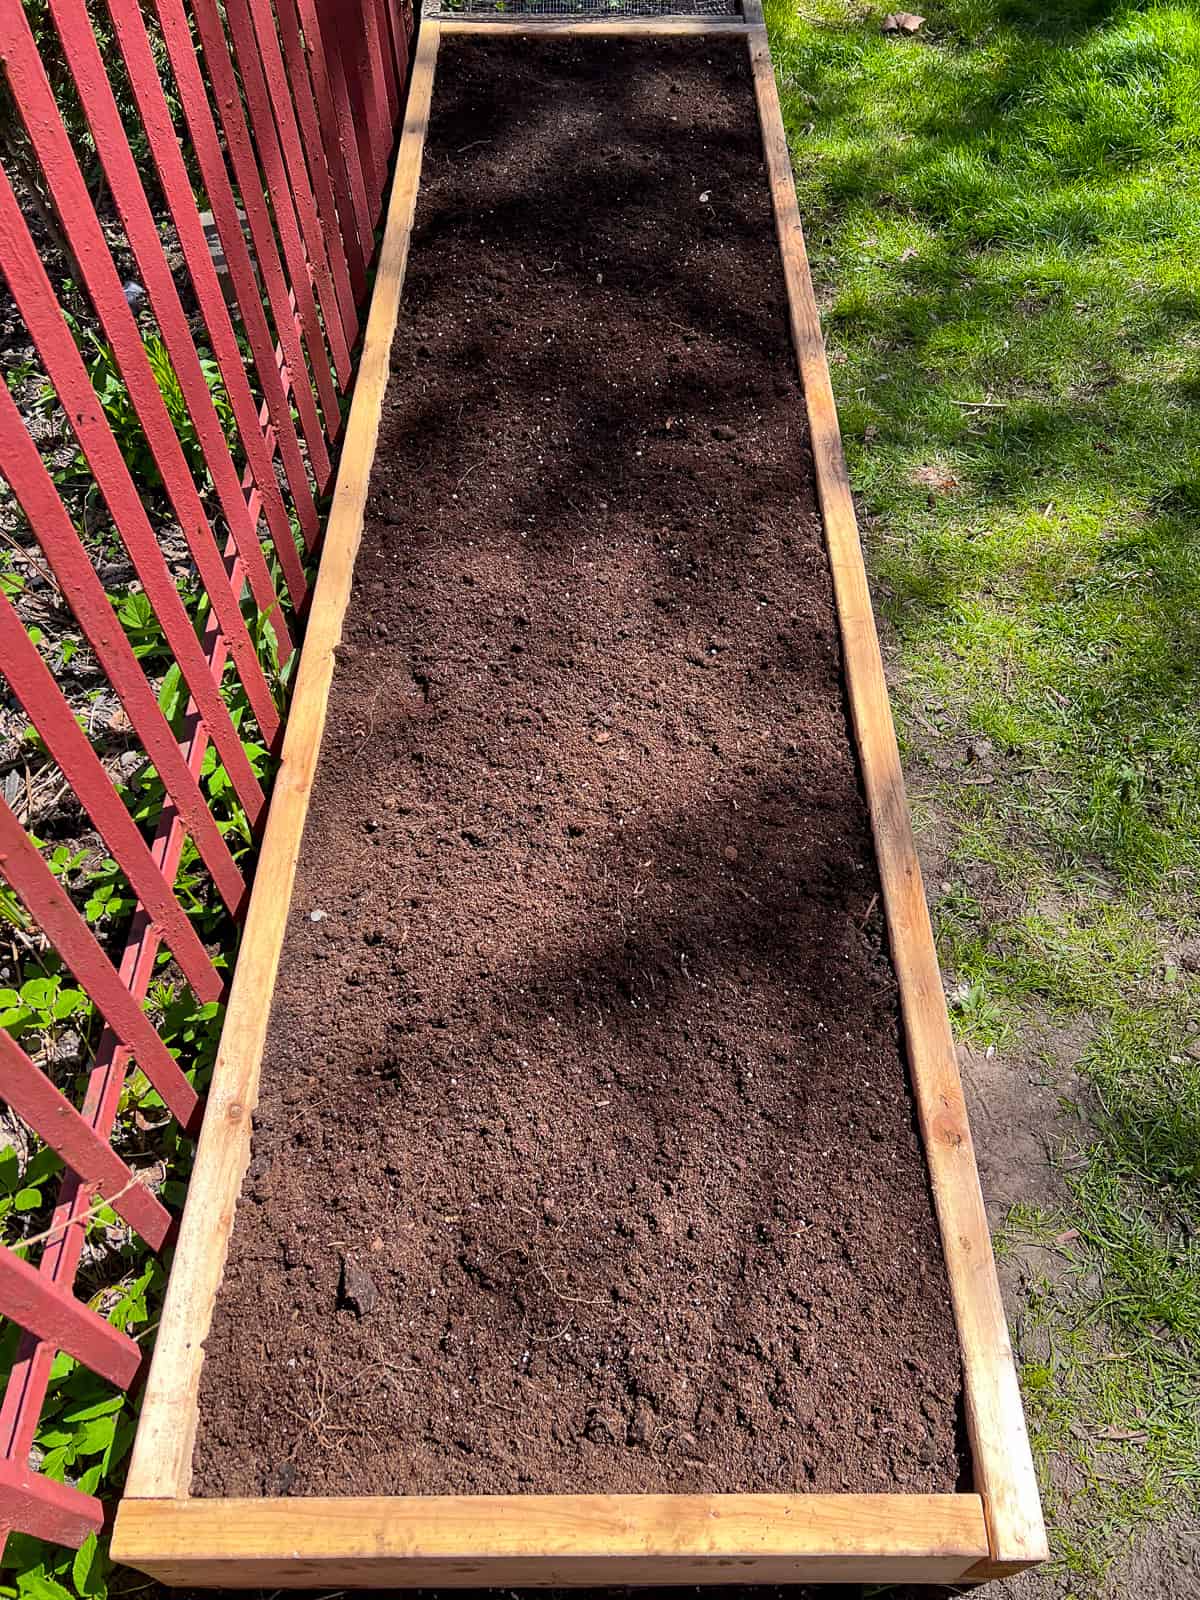 An image of a raised bed filled with soil.